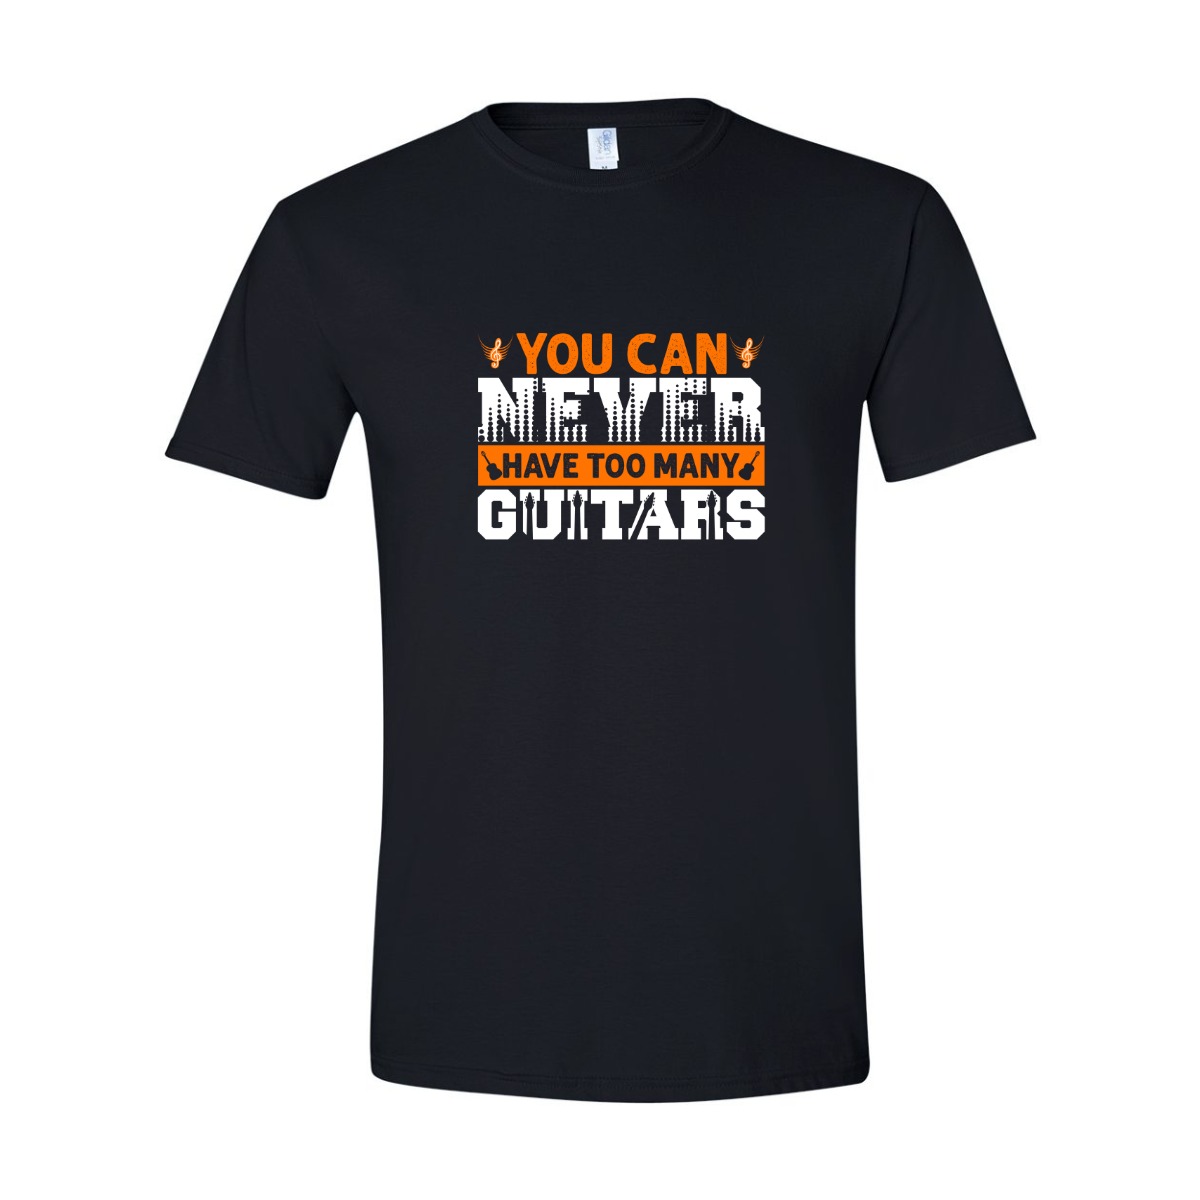 ADULT Unisex T-Shirt MUSA062 YOU CAN NEVER HAVE TOO MANY GUITARS